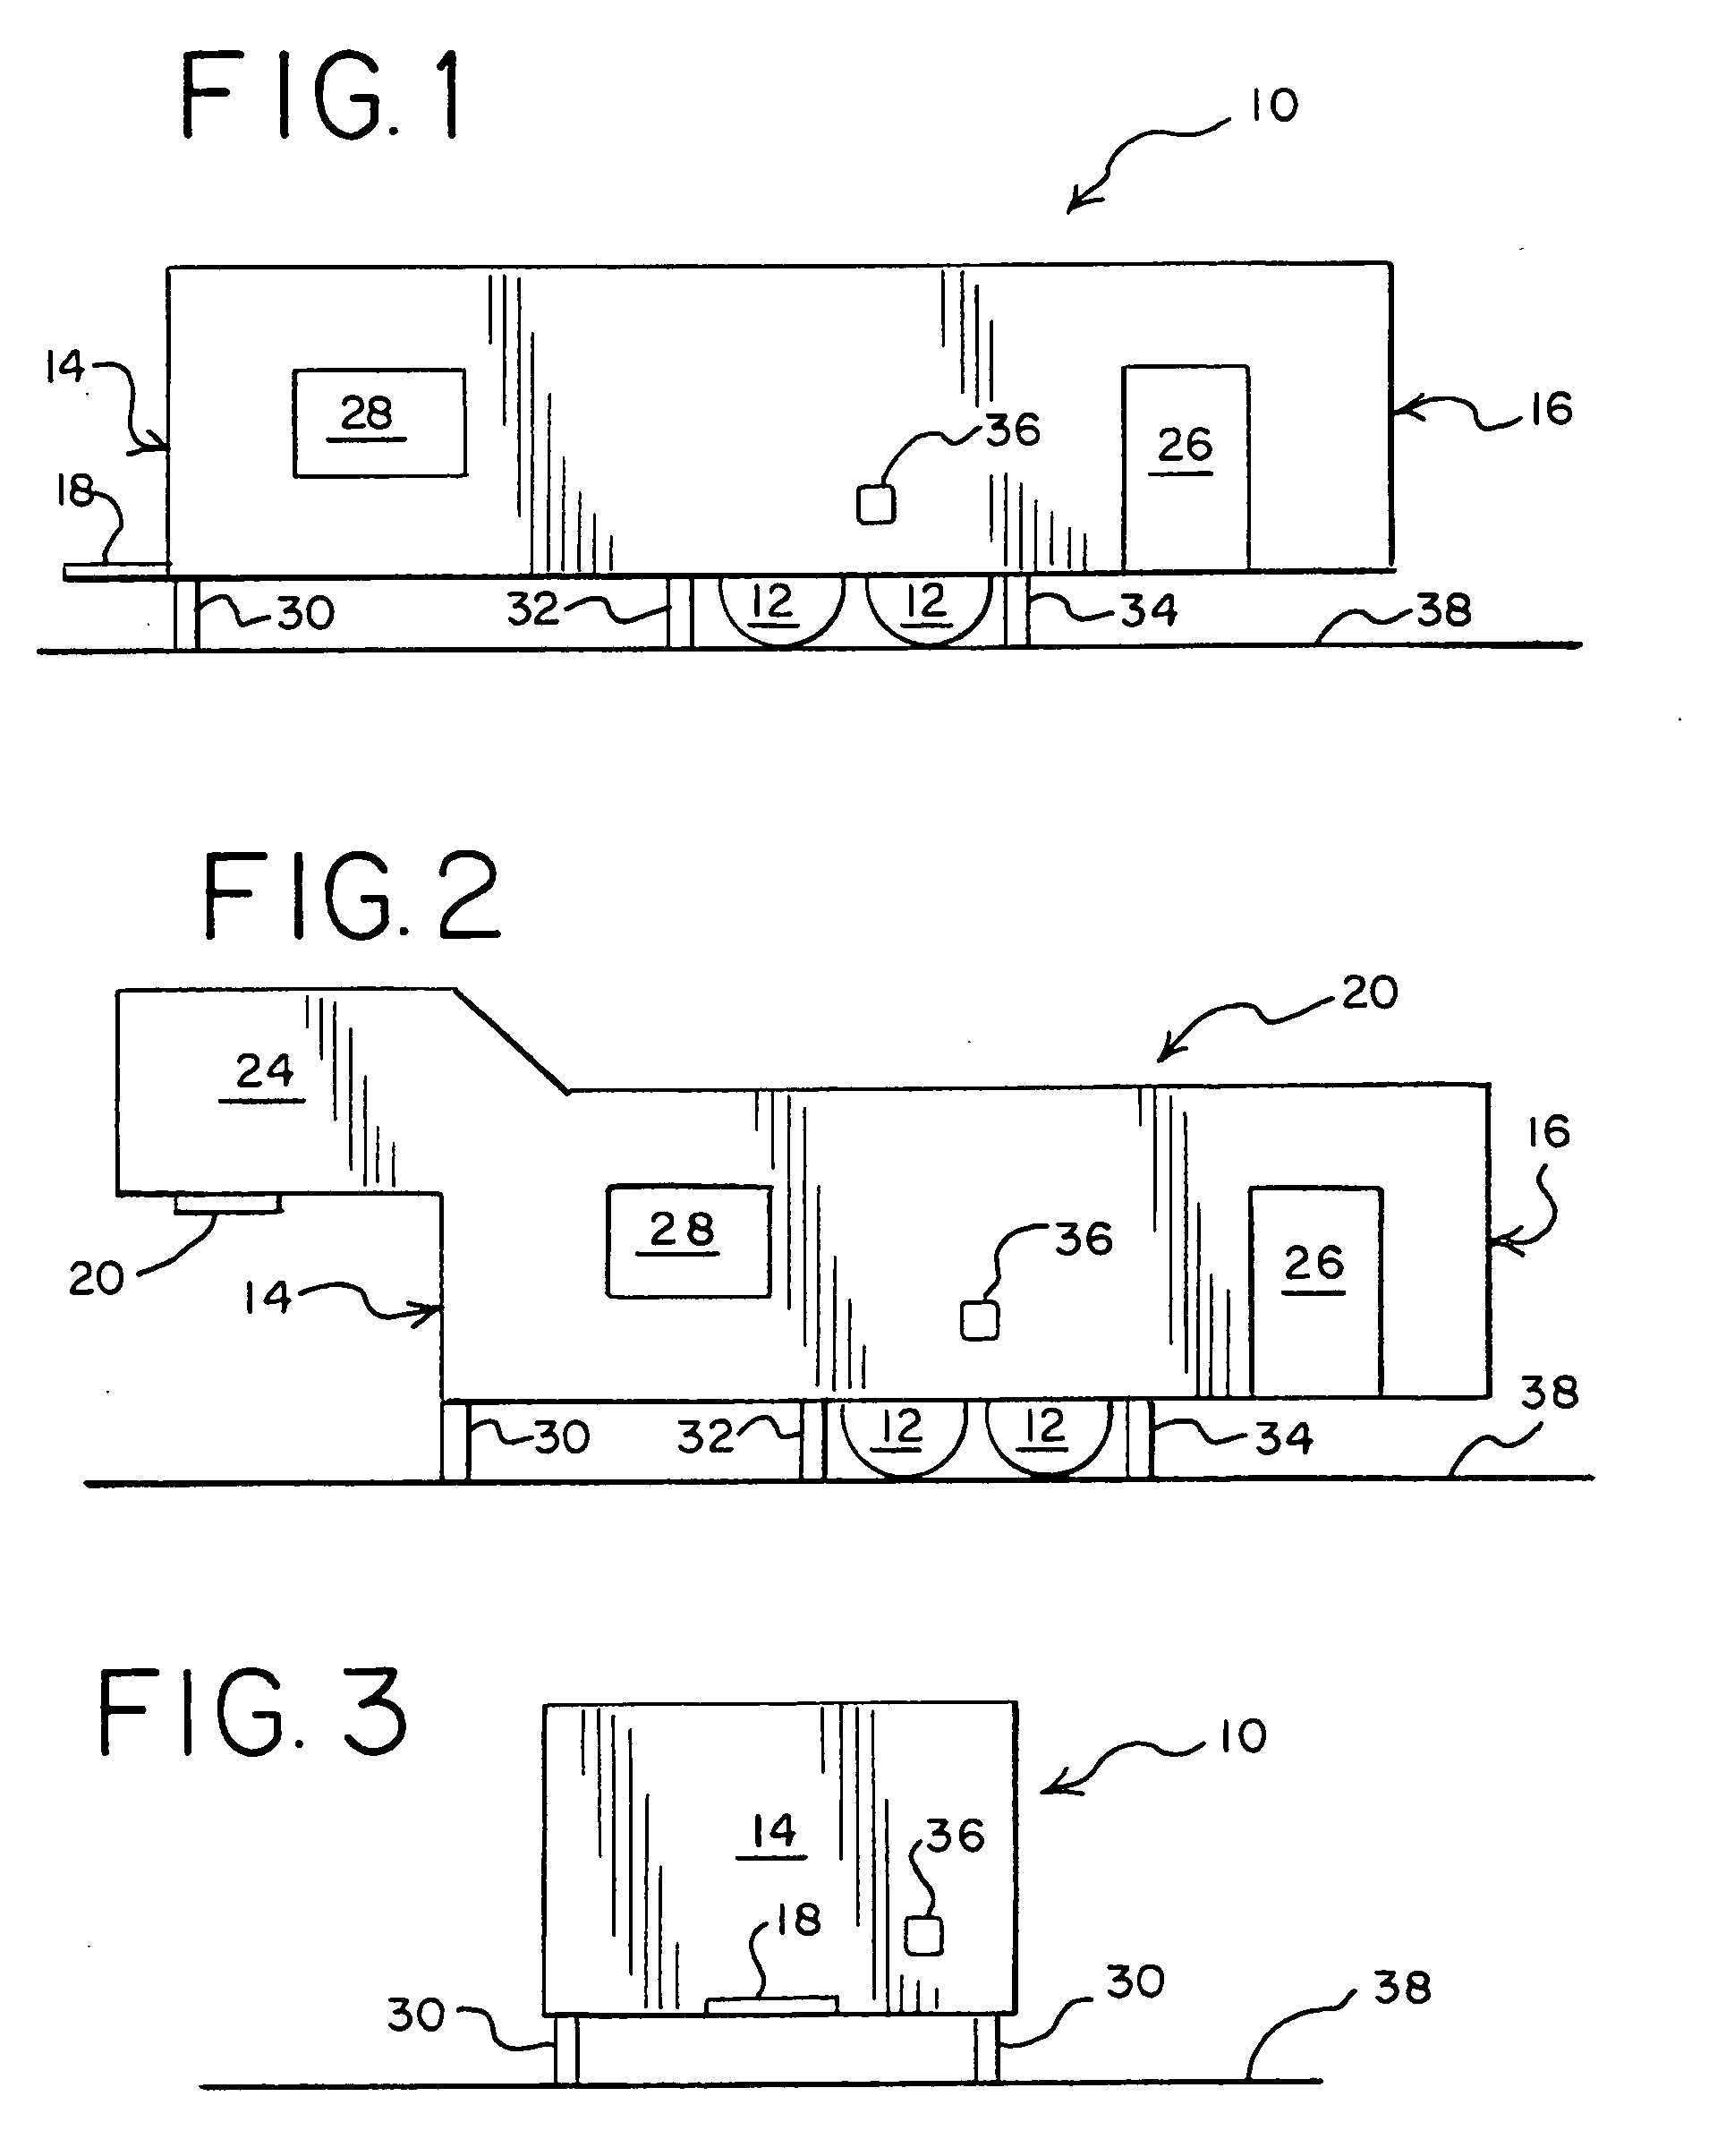 Method and apparatus for leveling travel trailers